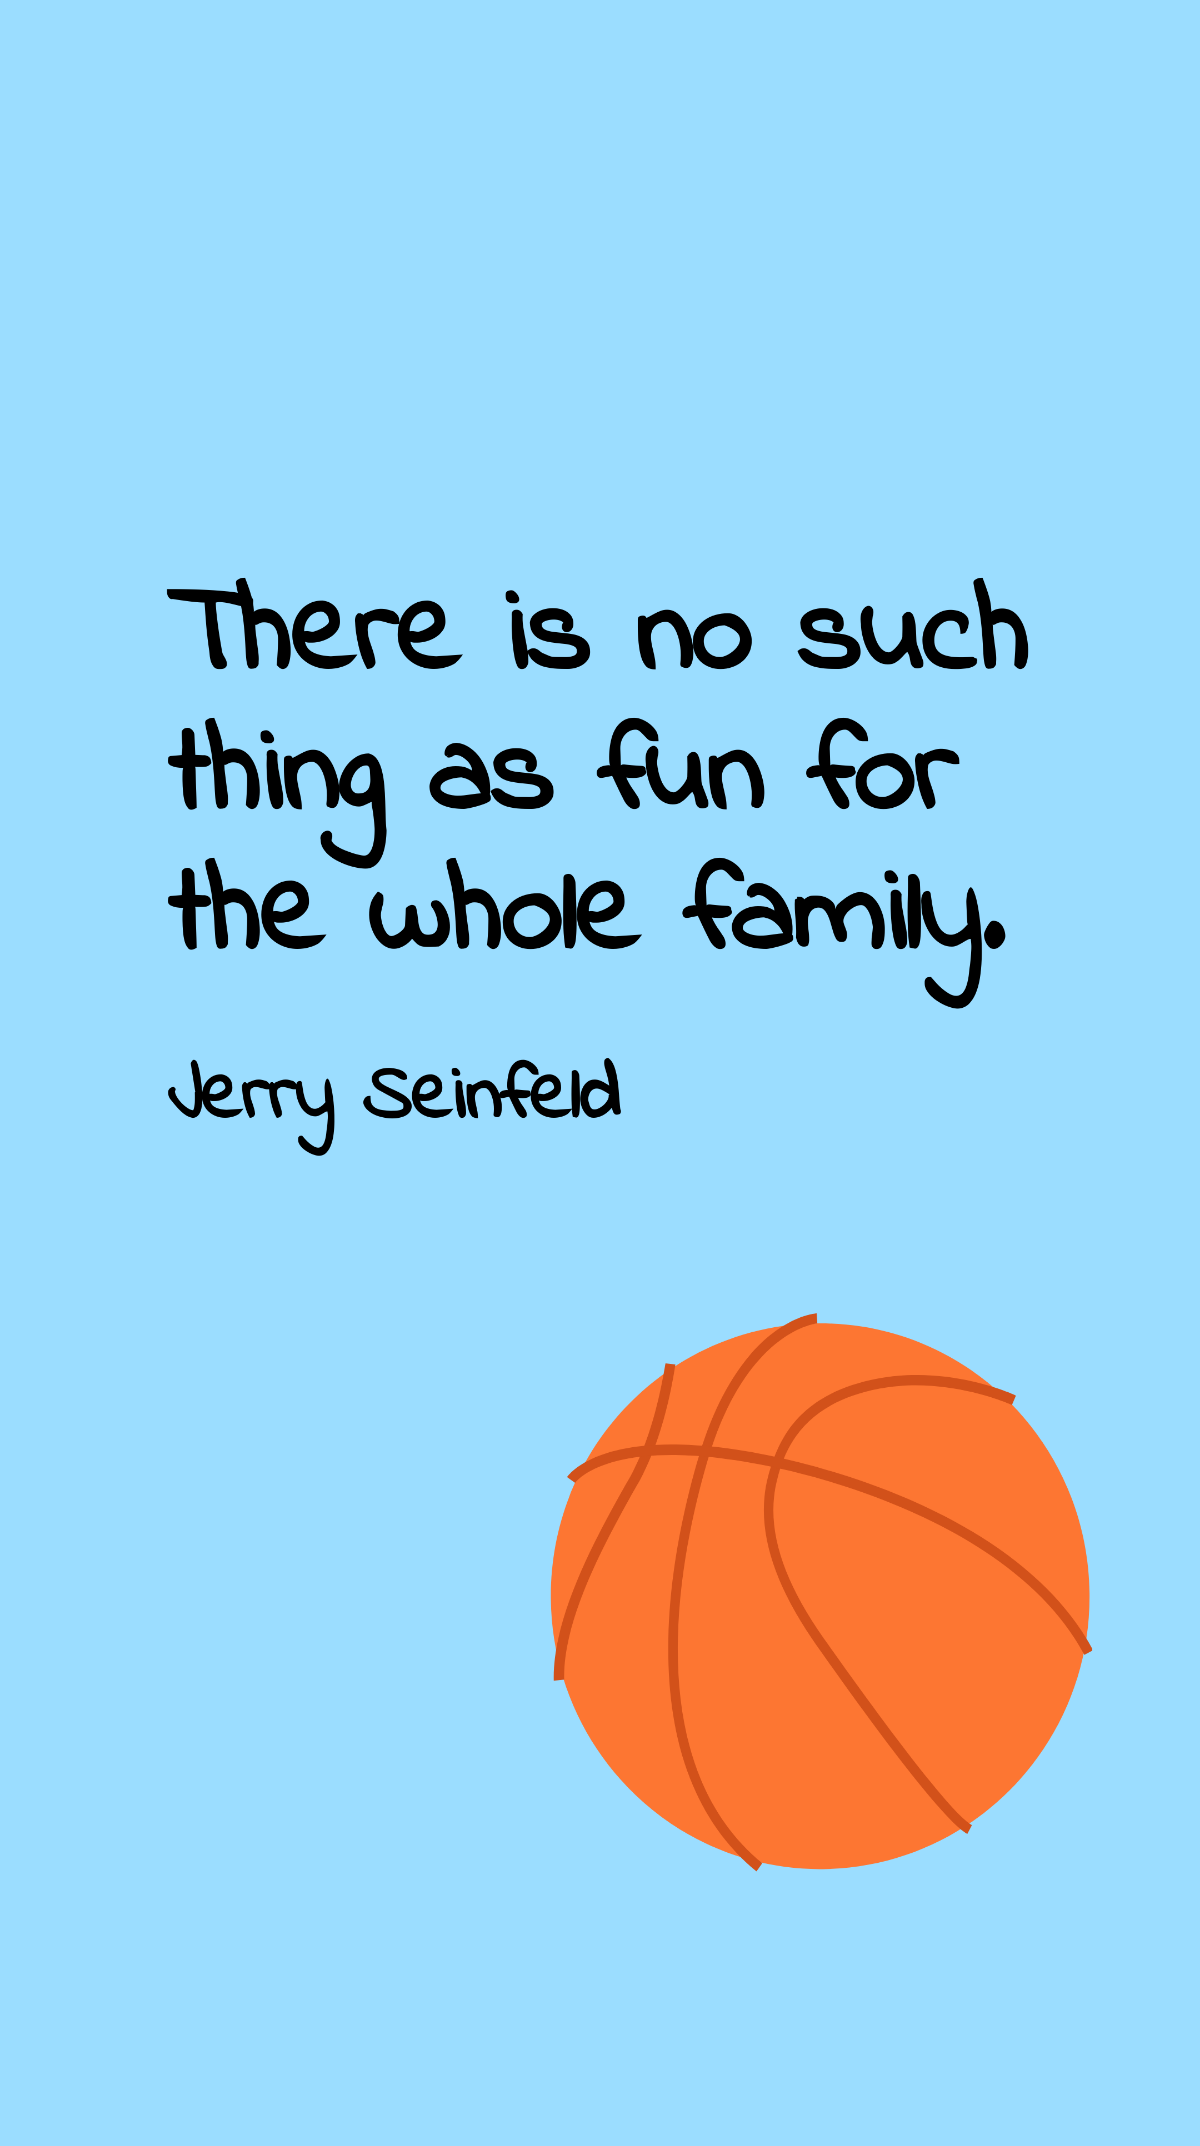 Jerry Seinfeld - There is no such thing as fun for the whole family. Template